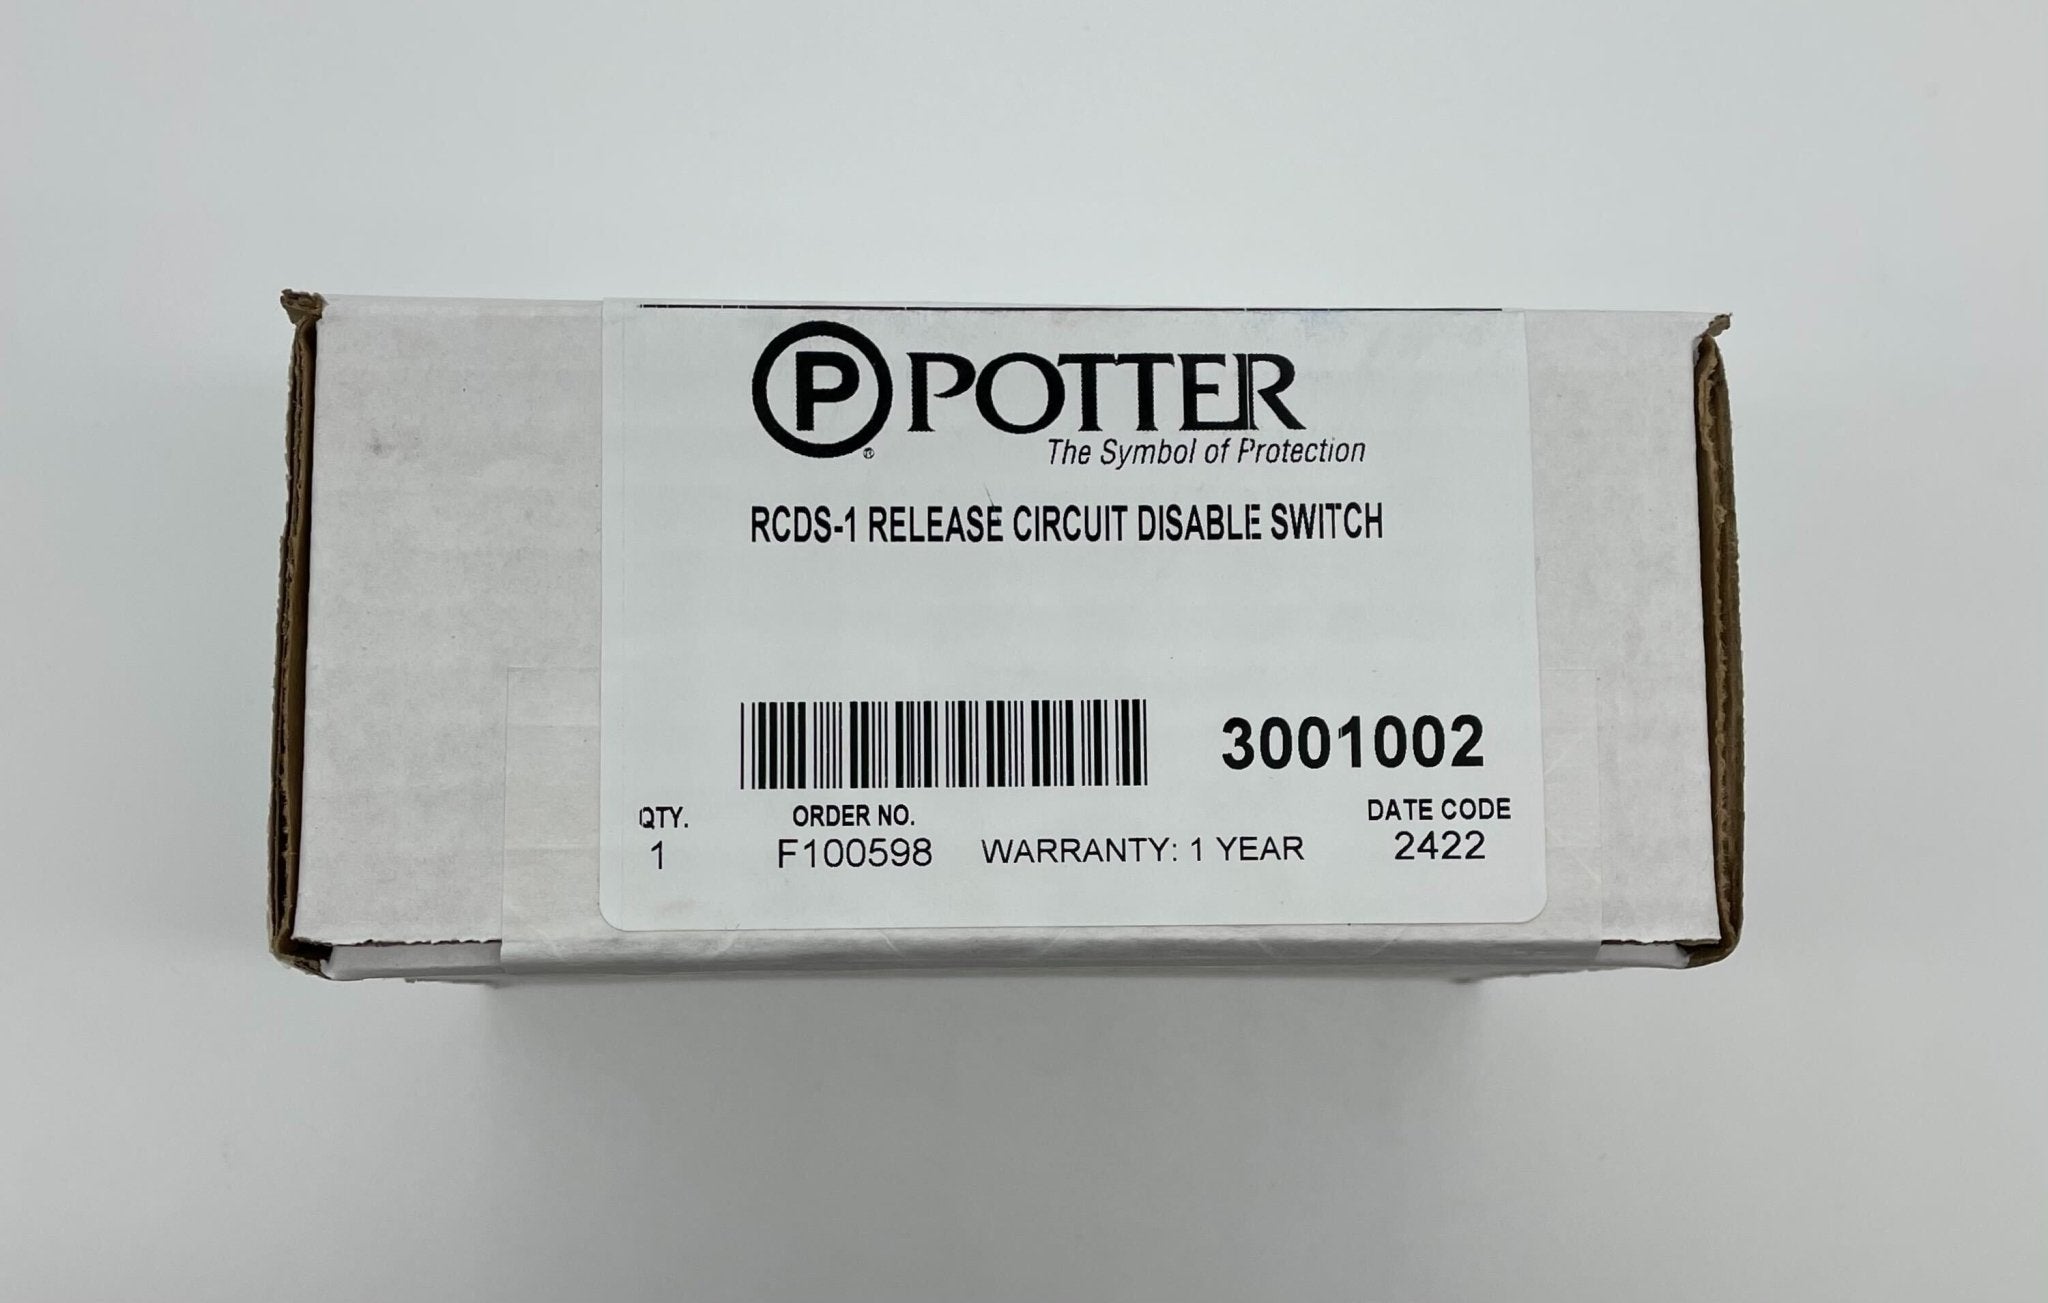 Potter RCDS-1 - The Fire Alarm Supplier